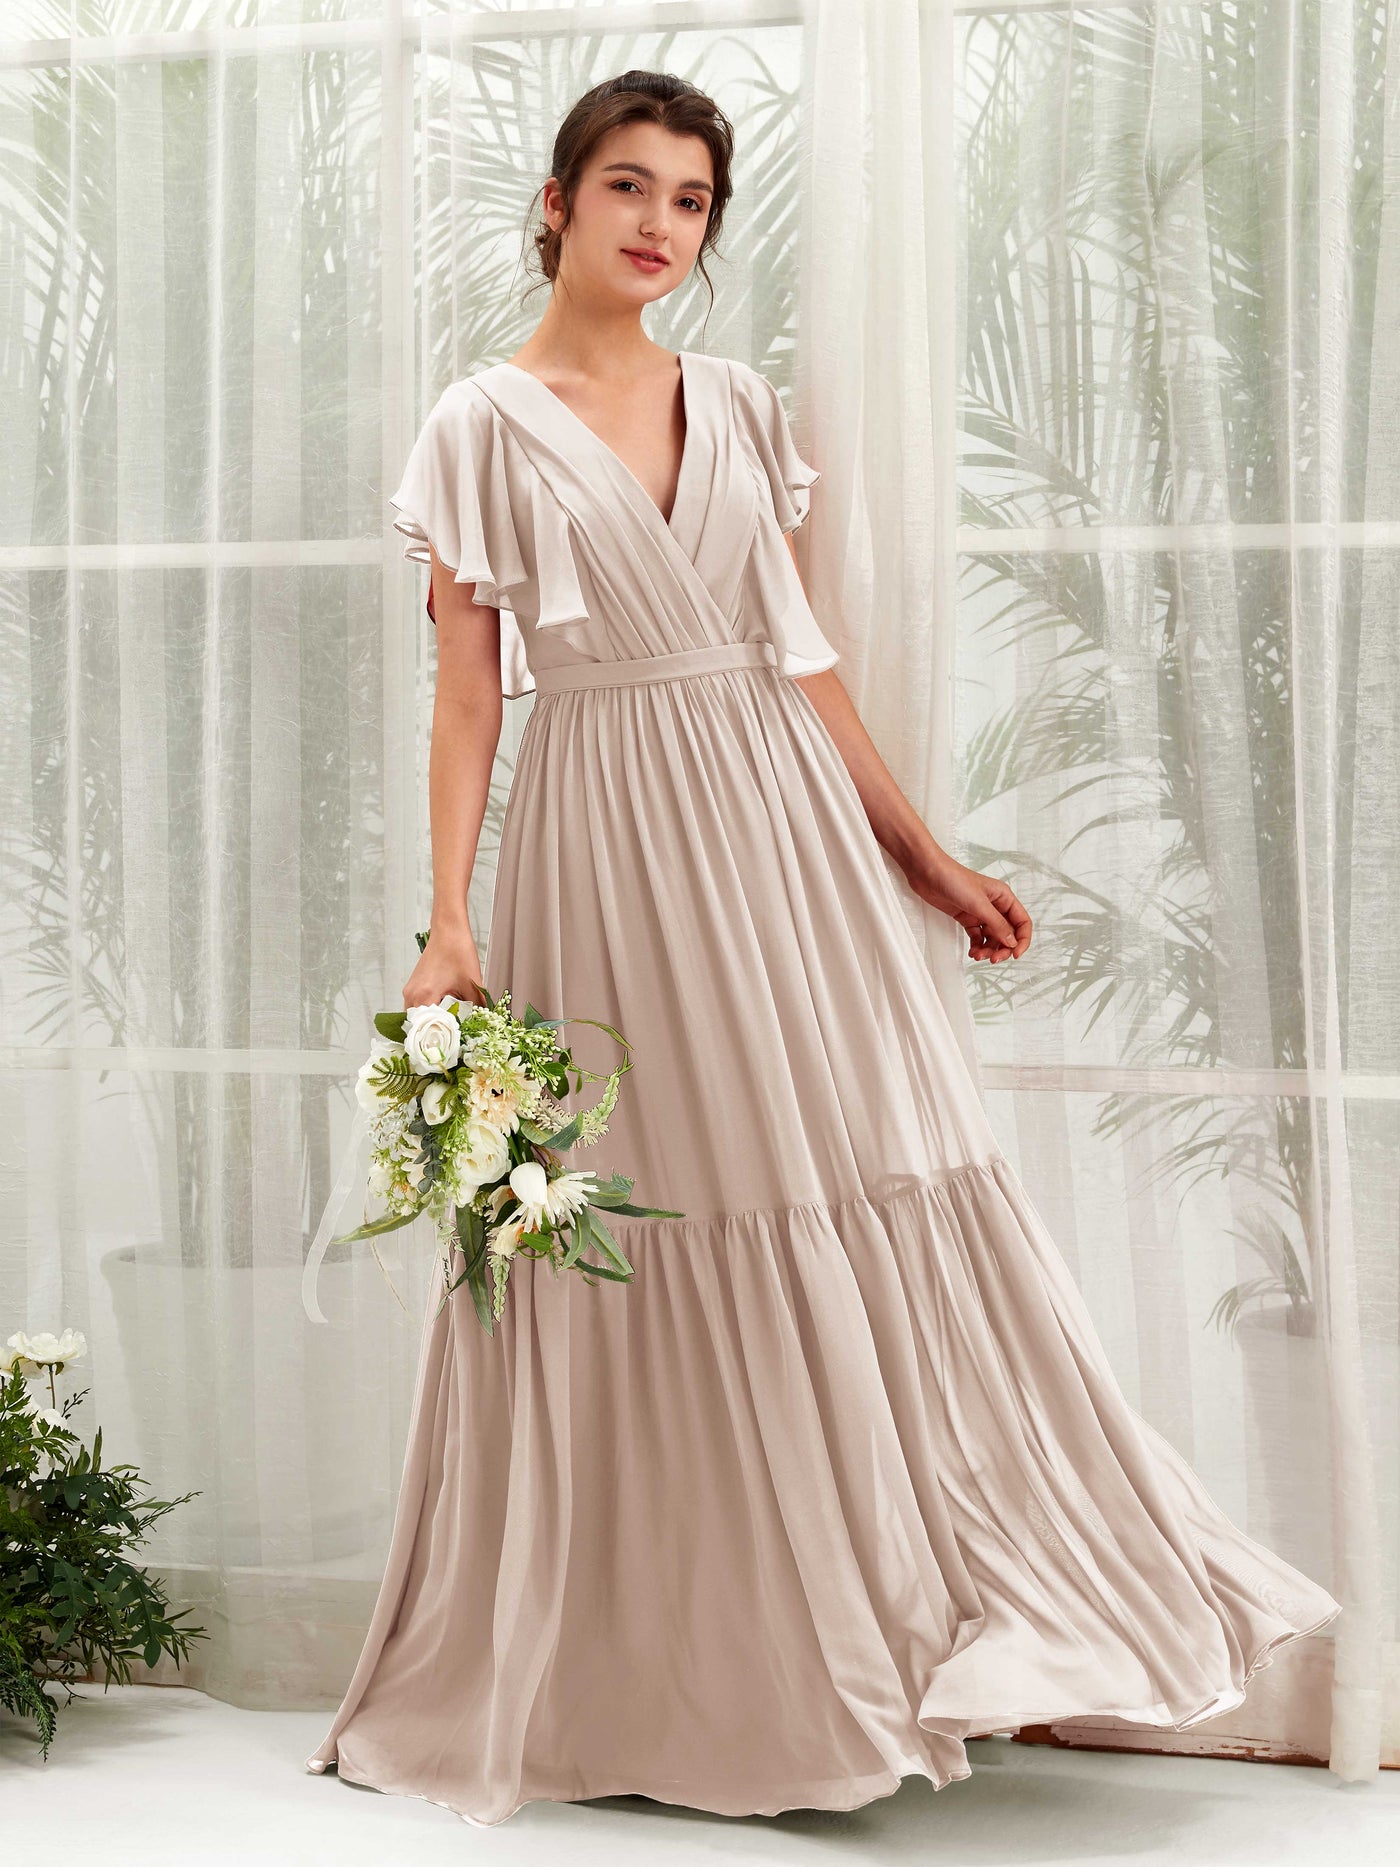 Champagne Bridesmaid Dresses Bridesmaid Dress A-line Chiffon V-neck Full Length Short Sleeves Wedding Party Dress (81225916)#color_champagne